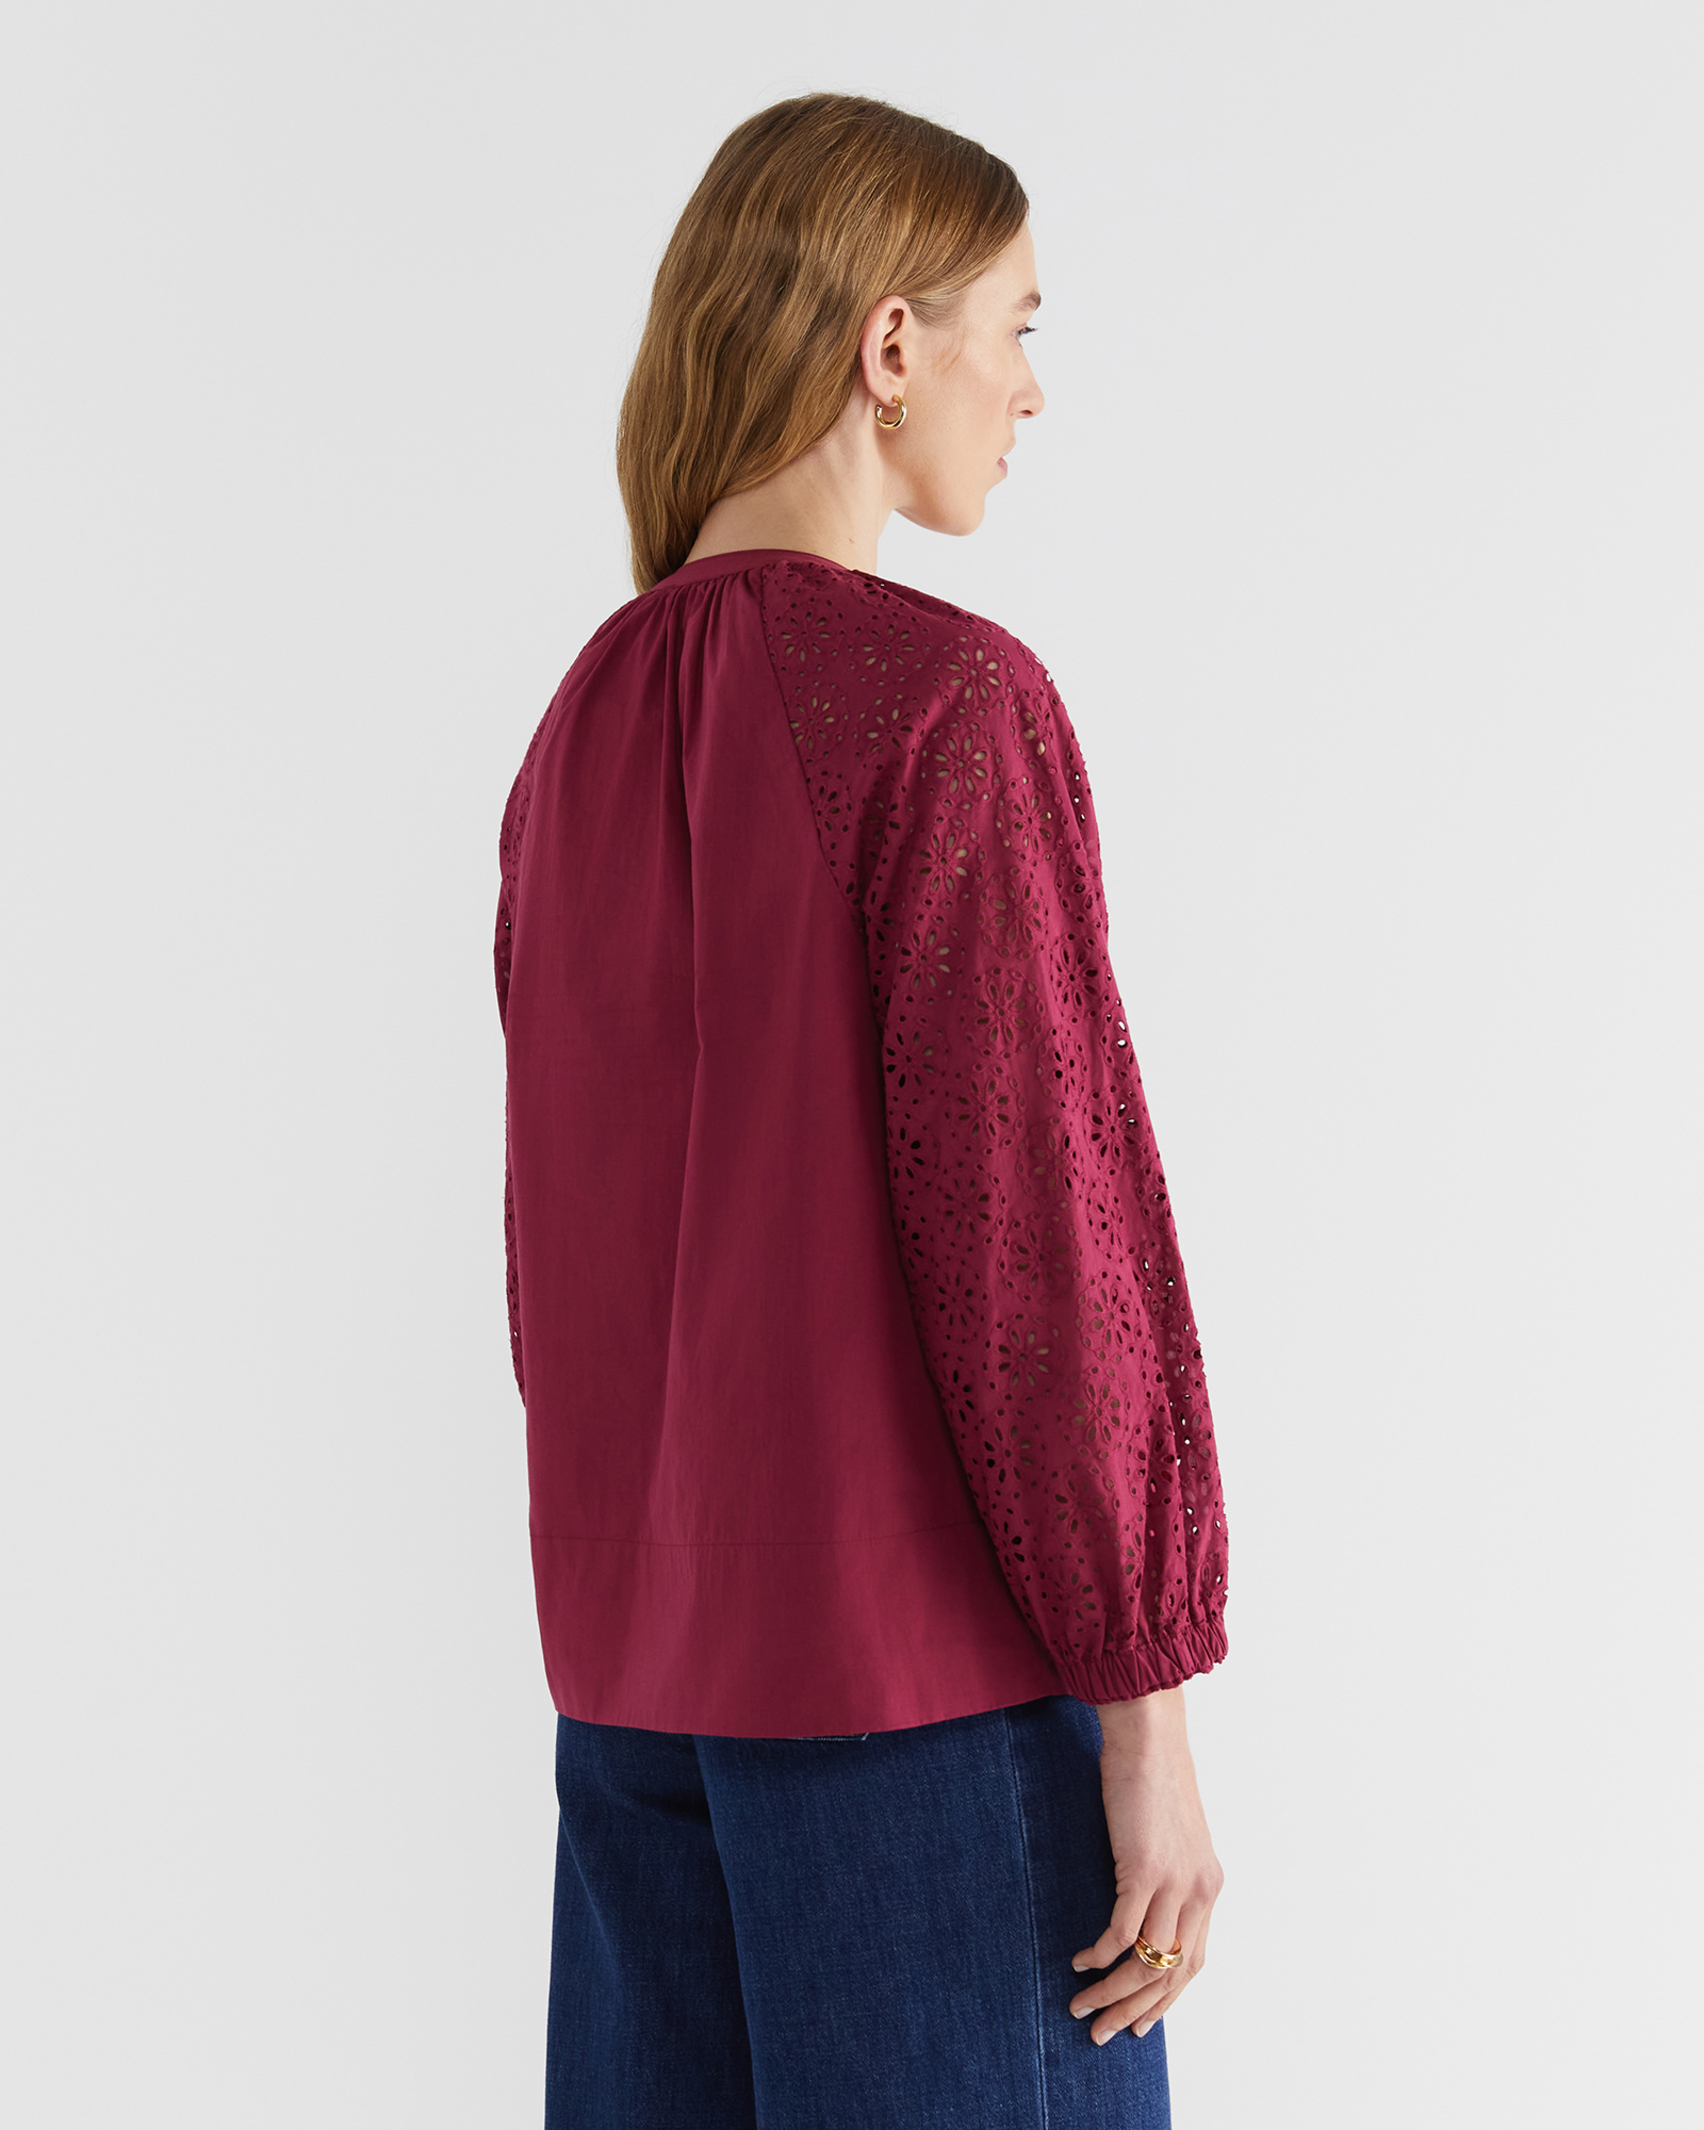 Sorrento Broderie Blouse in PINOT